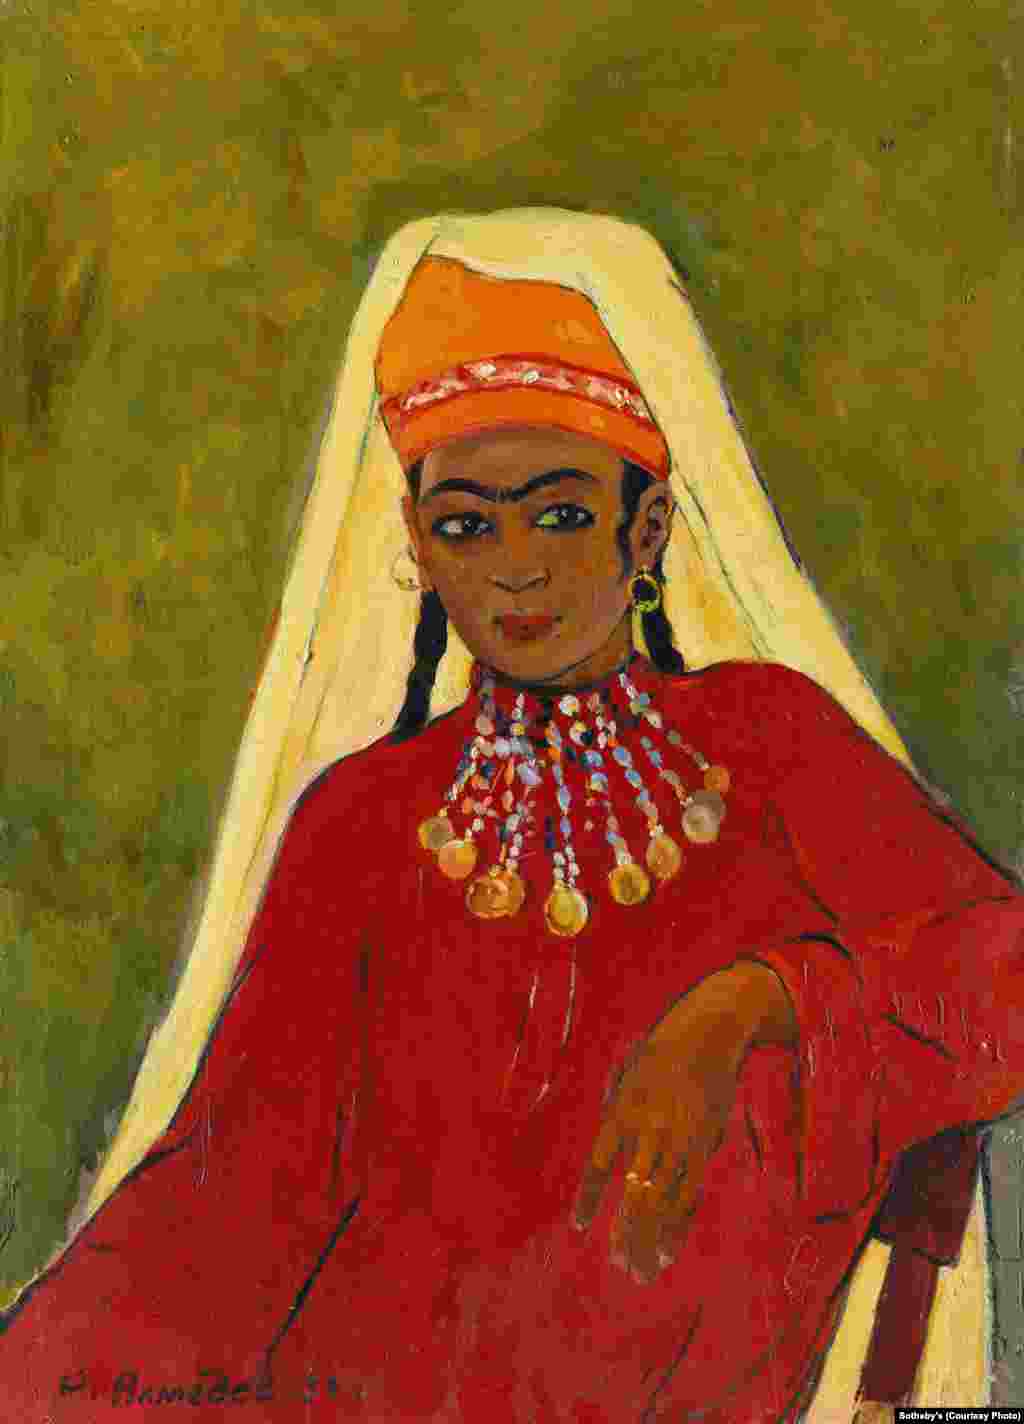 &ldquo;Girl From Surkhandarya,&rdquo; a 1959 painting by Uzbek artist Rakhim Akhmedov (1921-2008). The work was part of a series of portraits created by Akhmedov while he was studying decorative arts in southern Uzbekistan.